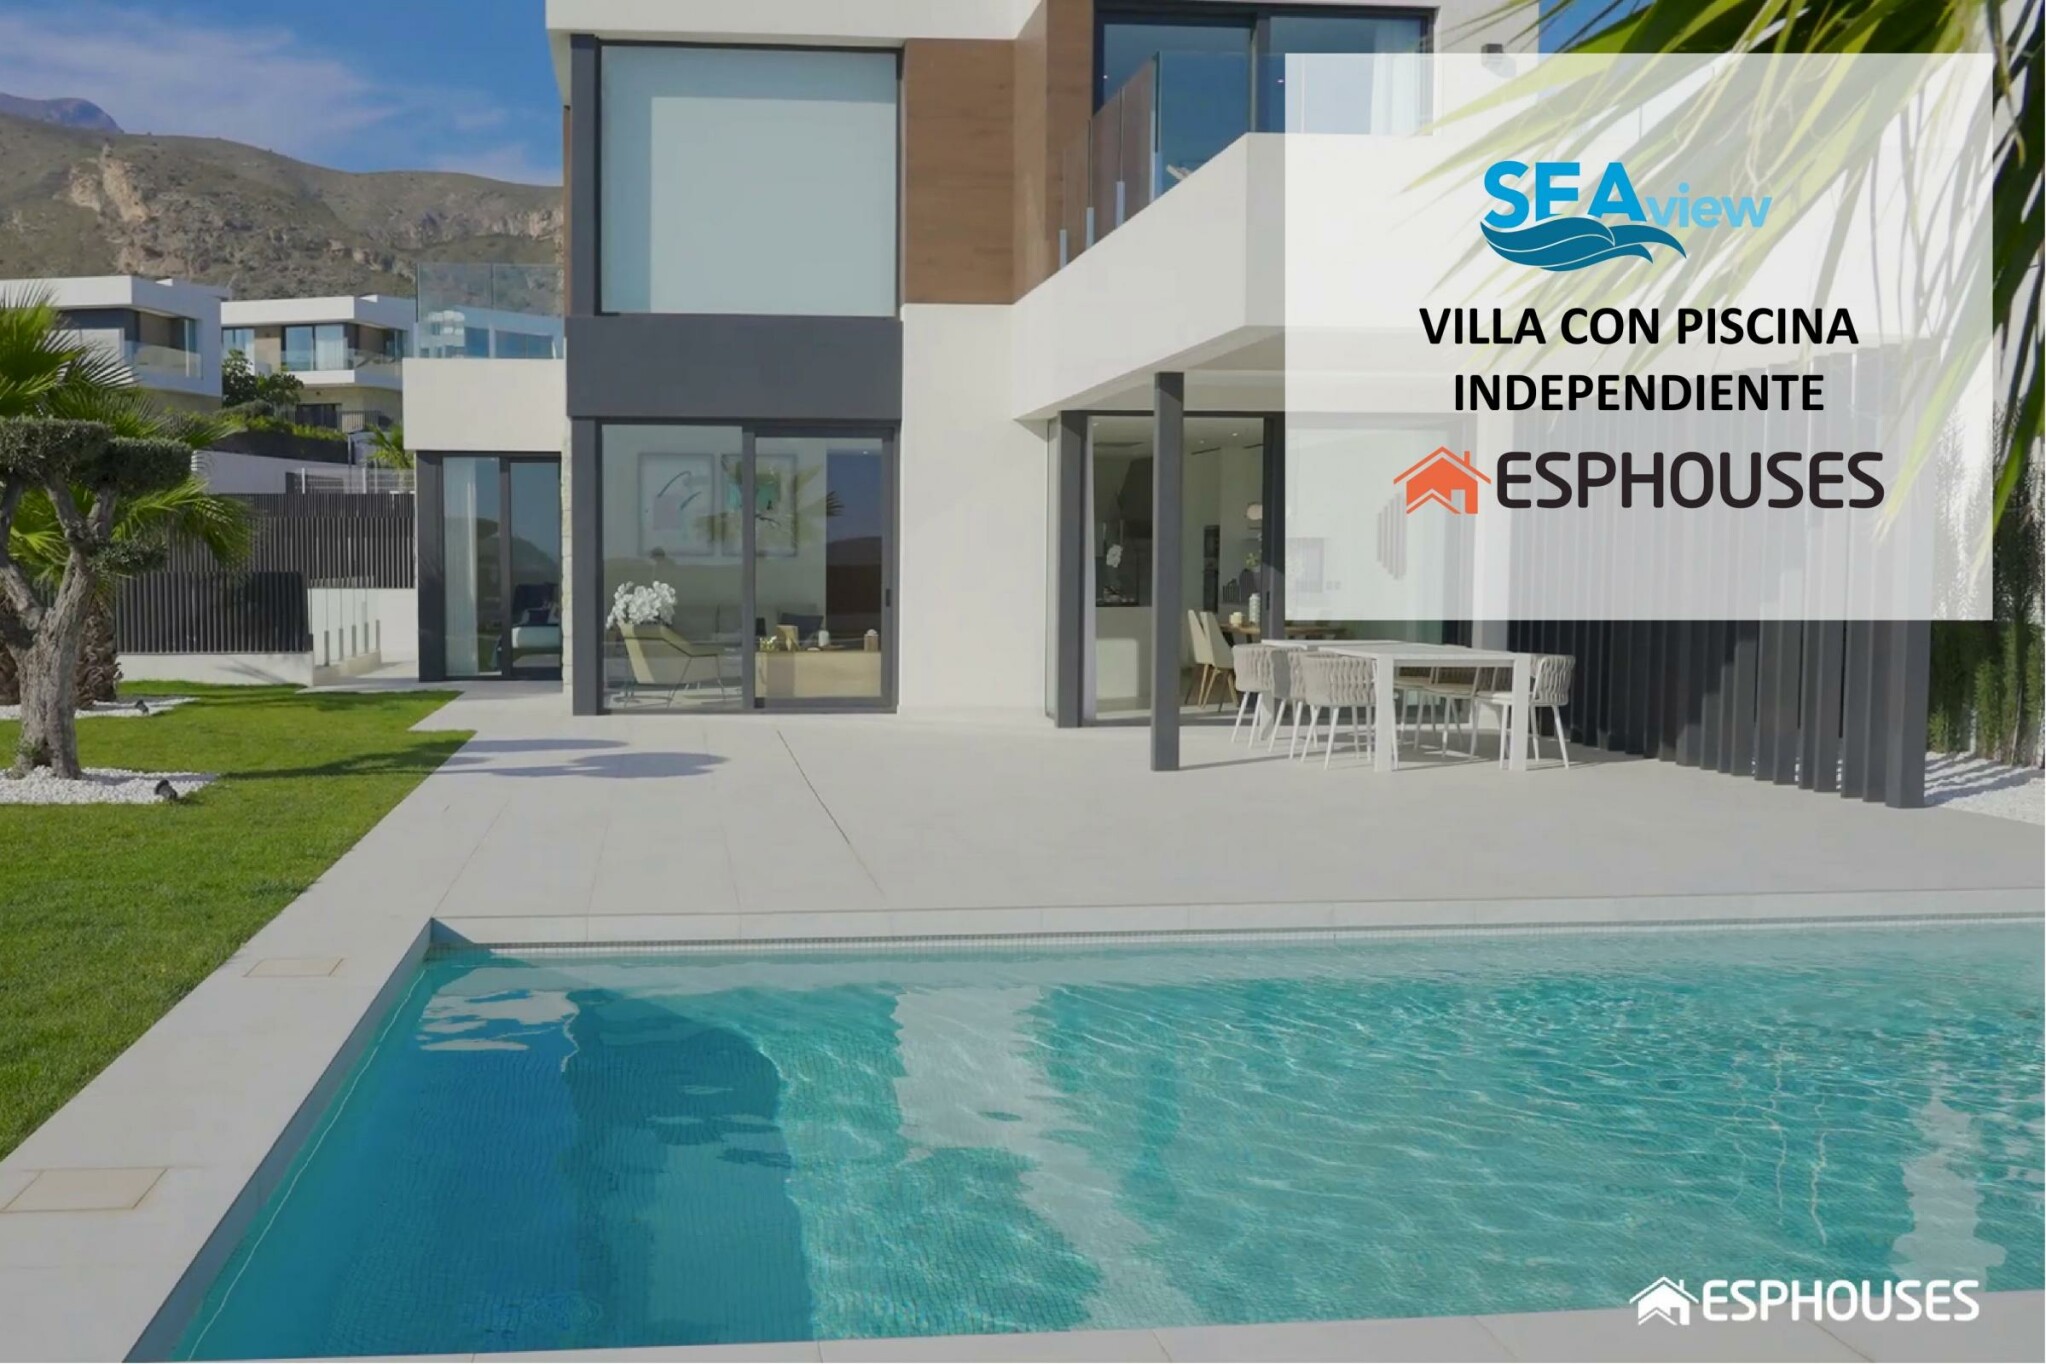 Villa with independent pool in Residencial SEAVIEW, a few minutes from Benidorm.